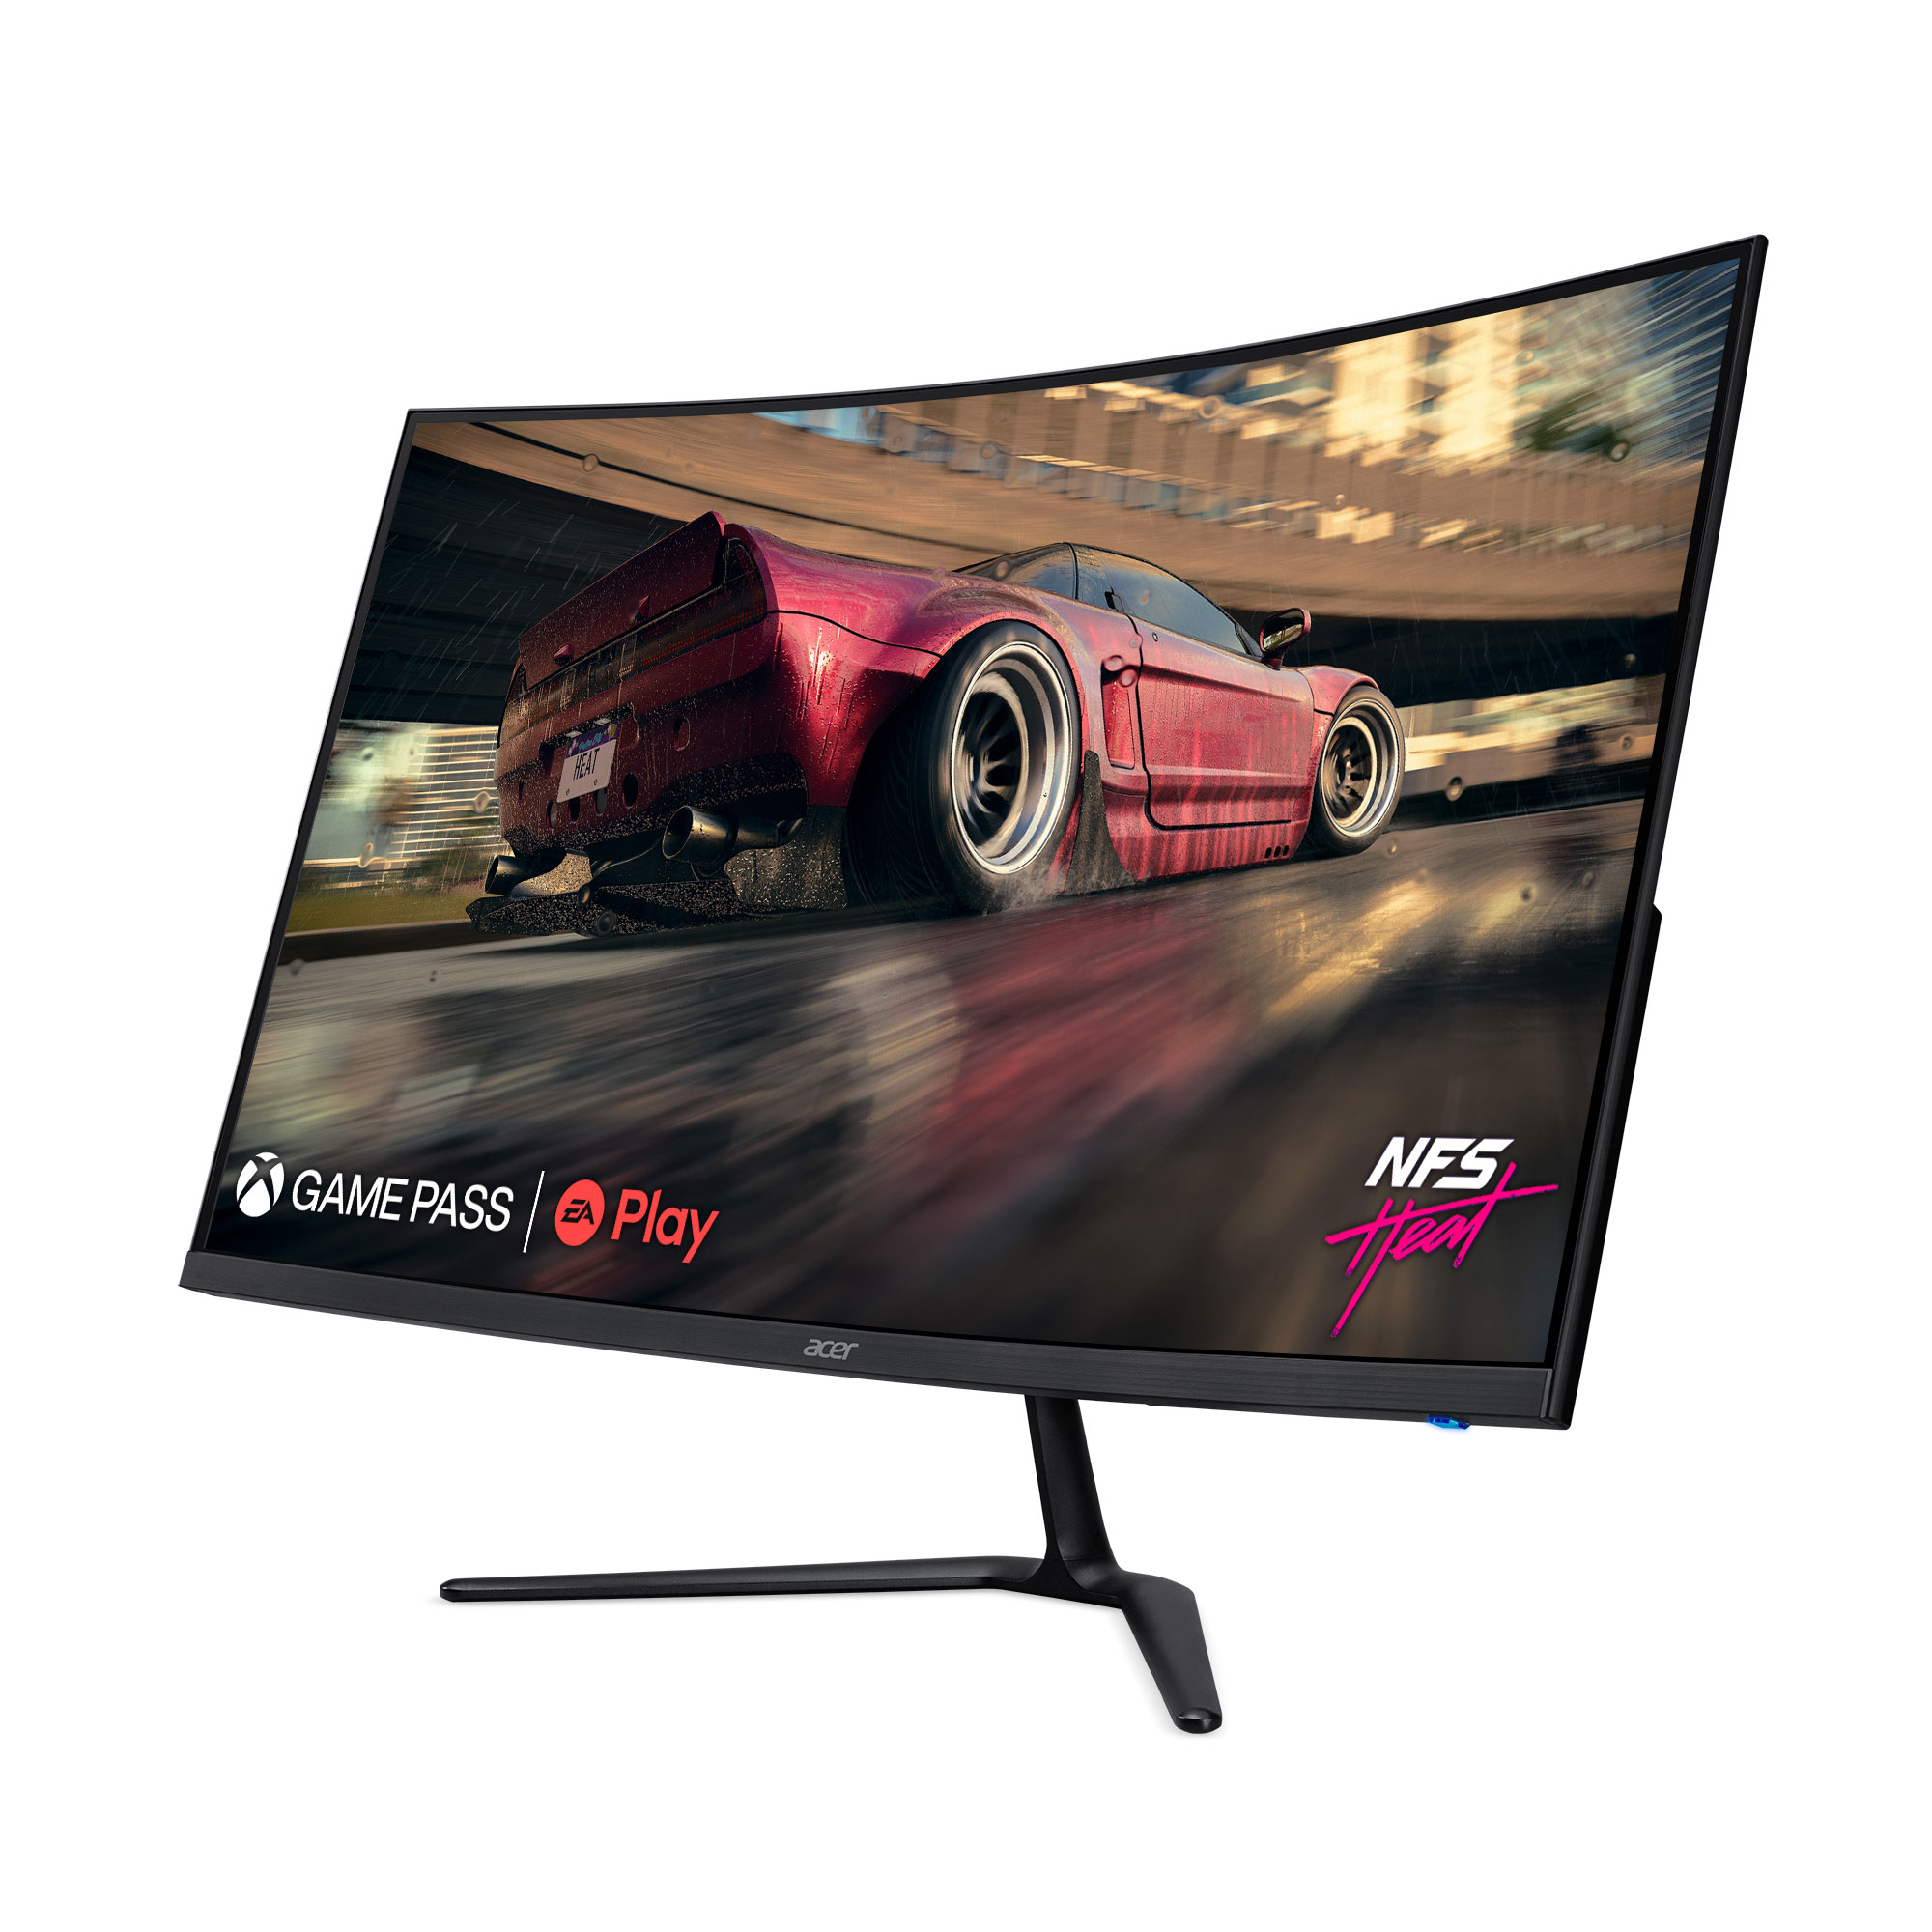 Acer Nitro 31.5" 1500R Curved Full HD (1920 x 1080) Gaming Monitor, Black, ED320QR S3biipx - image 3 of 8